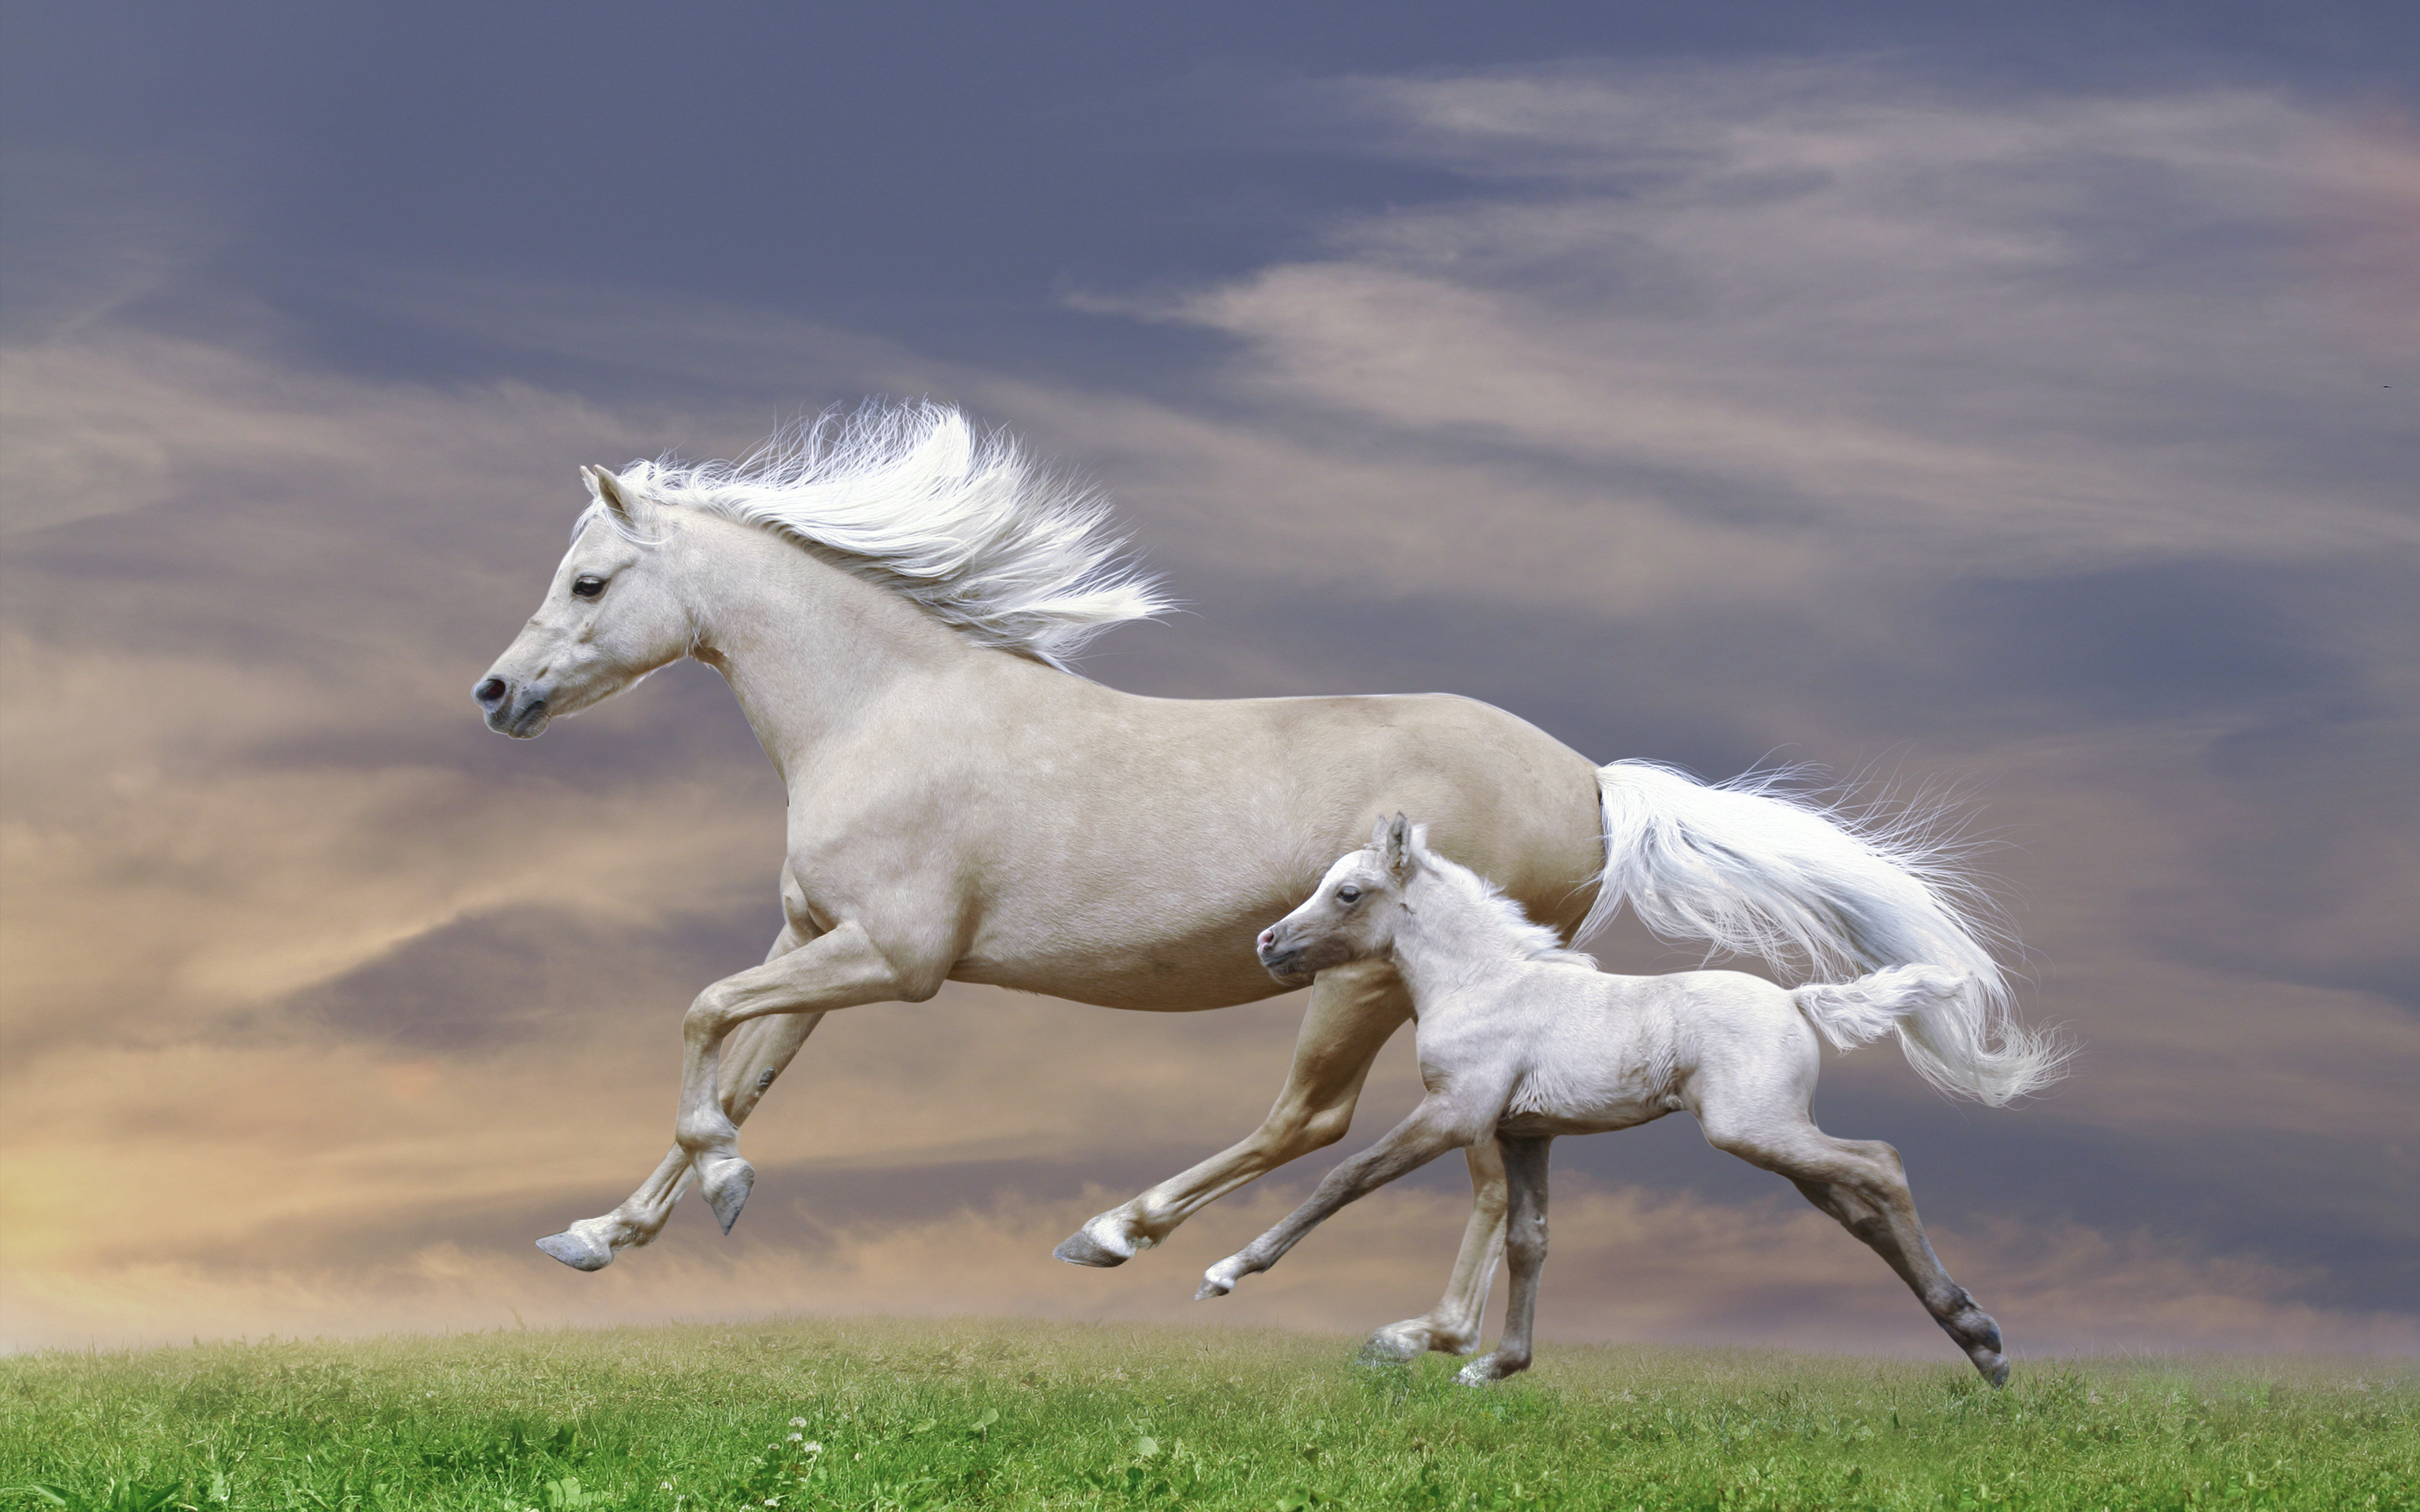 Download Original Resolution - Horse And Foal Galloping , HD Wallpaper & Backgrounds